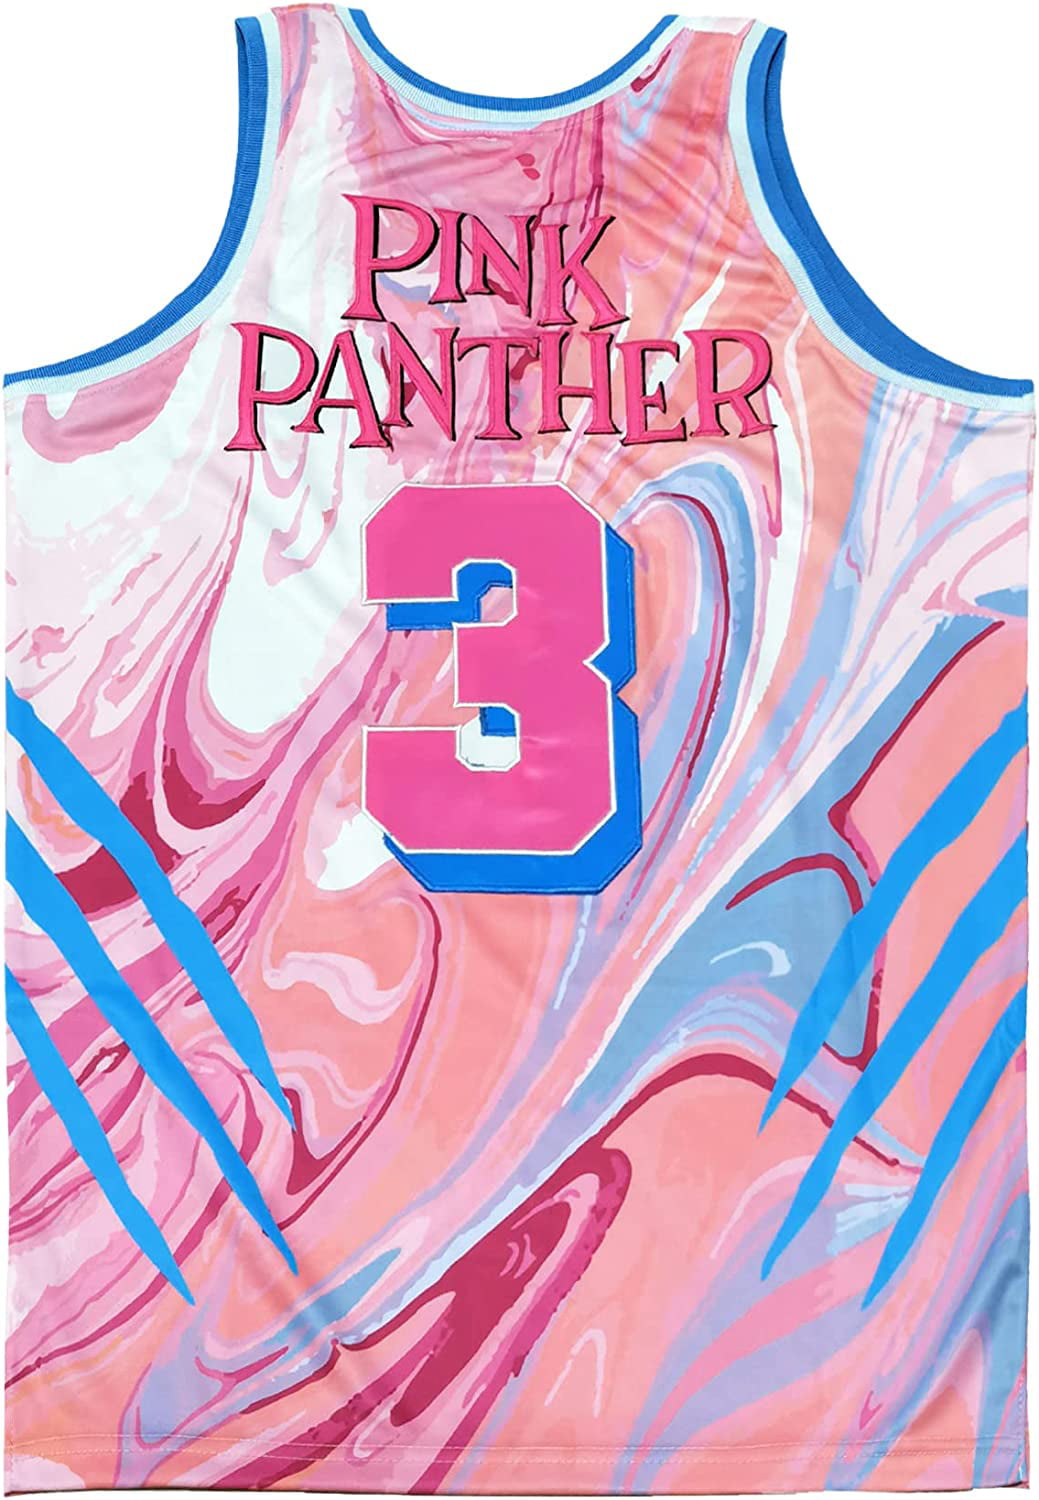 Pink Panther #3 Miami Basketball Jersey Youth Large Stitched Pink